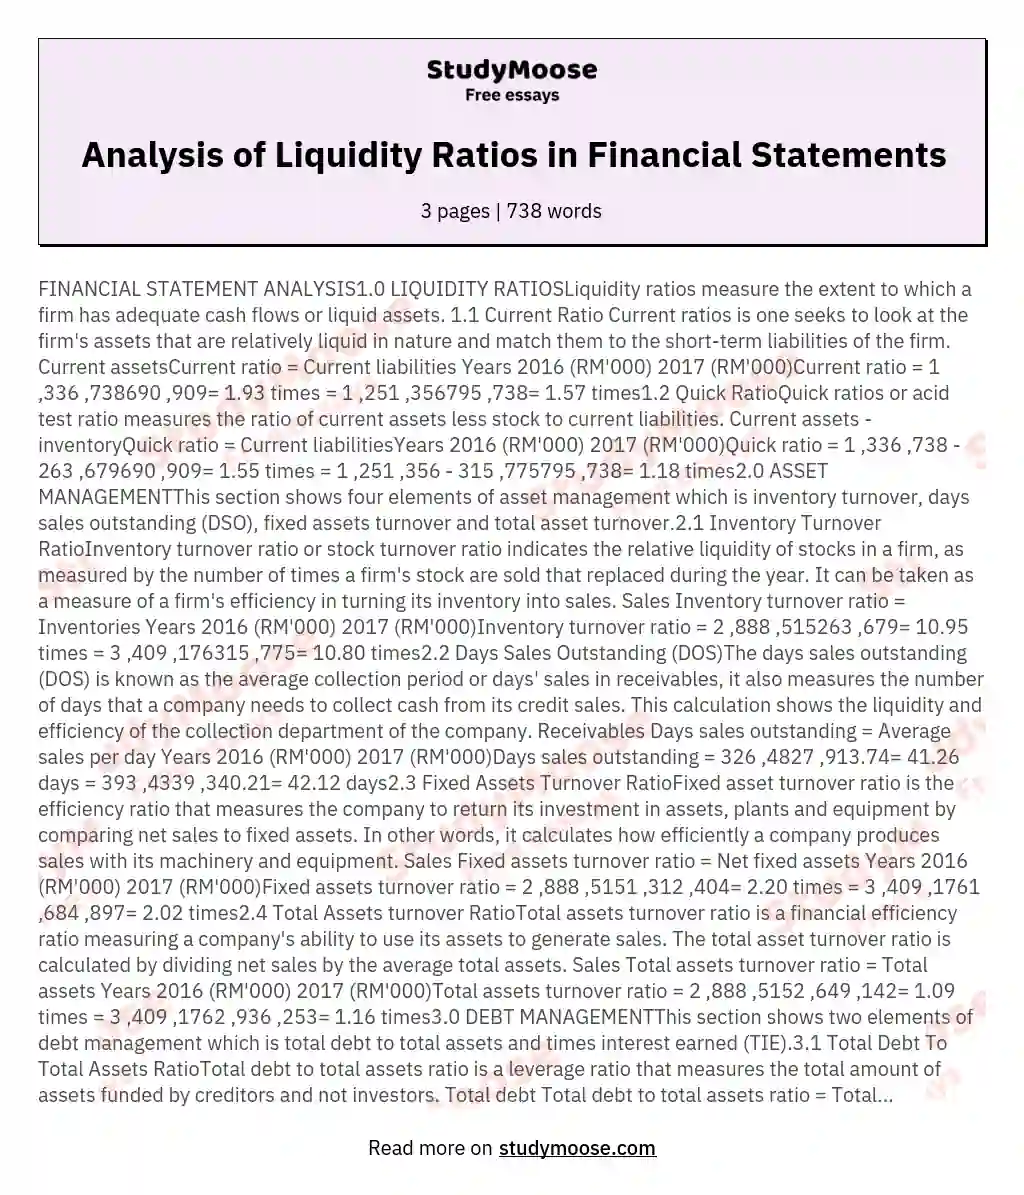 FINANCIAL STATEMENT ANALYSIS10 LIQUIDITY RATIOSLiquidity ratios measure the extent to which a